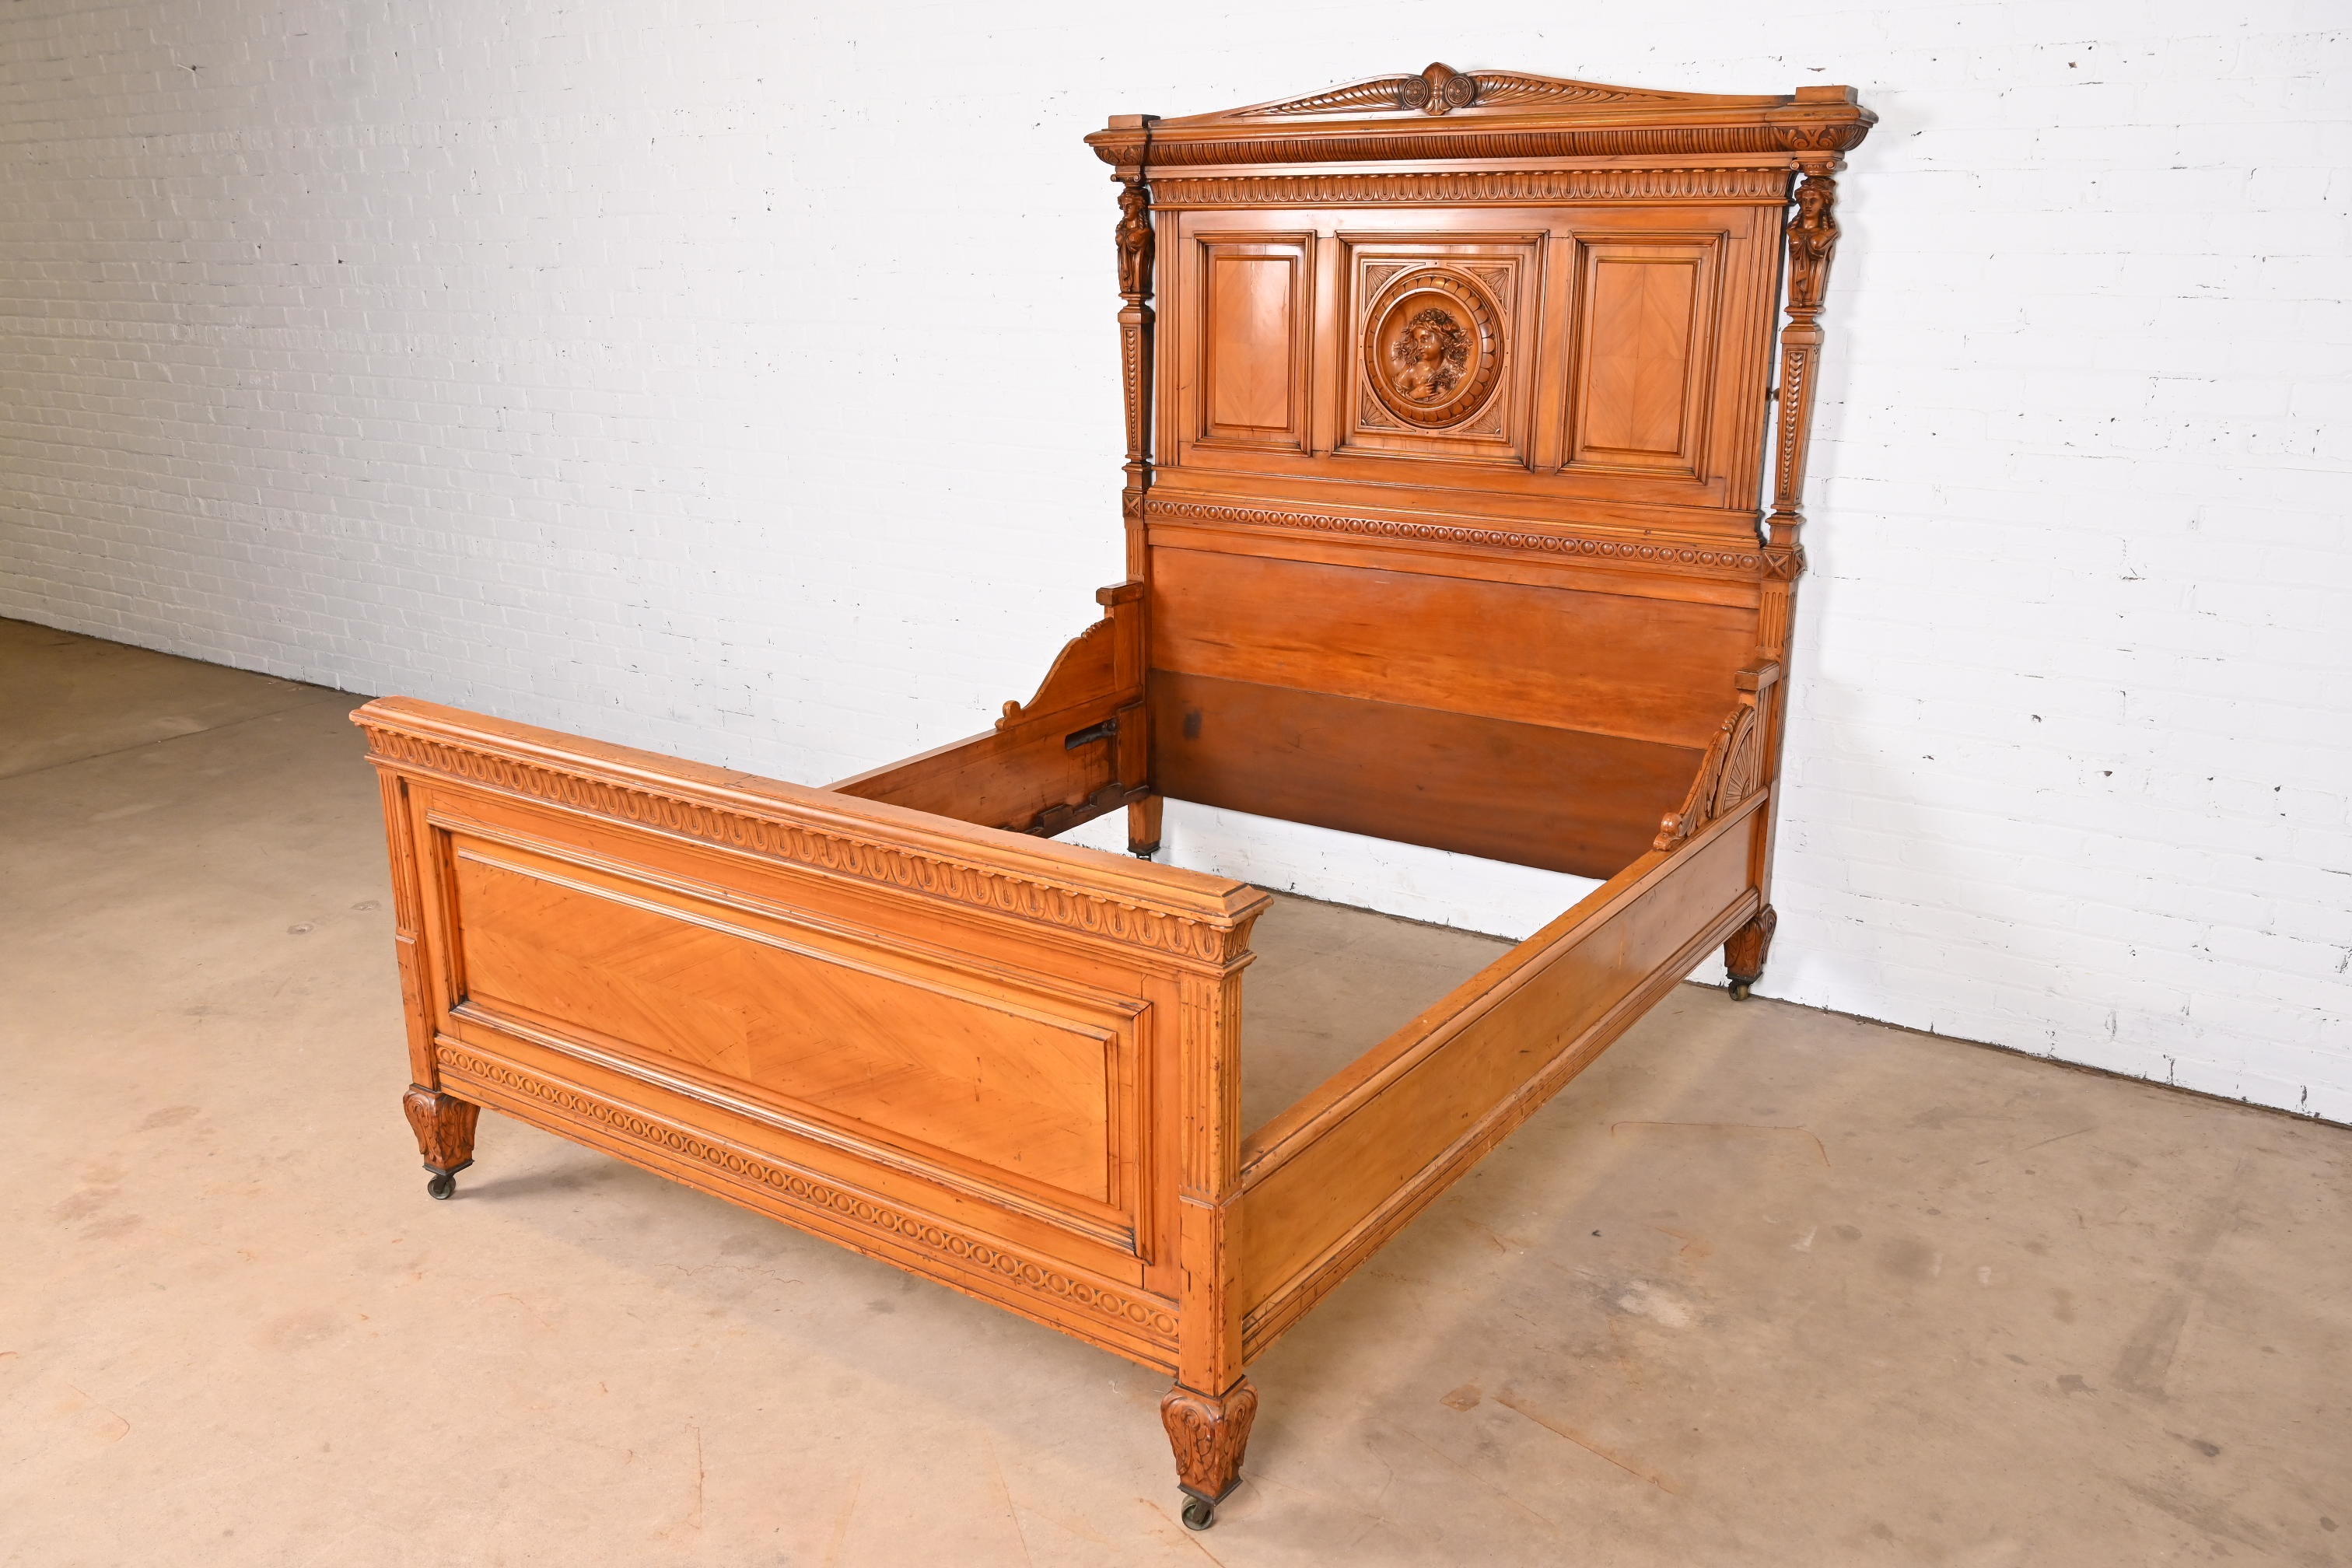 A gorgeous Victorian monumental ornate carved walnut full size bed

Attributed to R.J. Horner & Co.

USA, Circa 1890s

Measures: 65.5